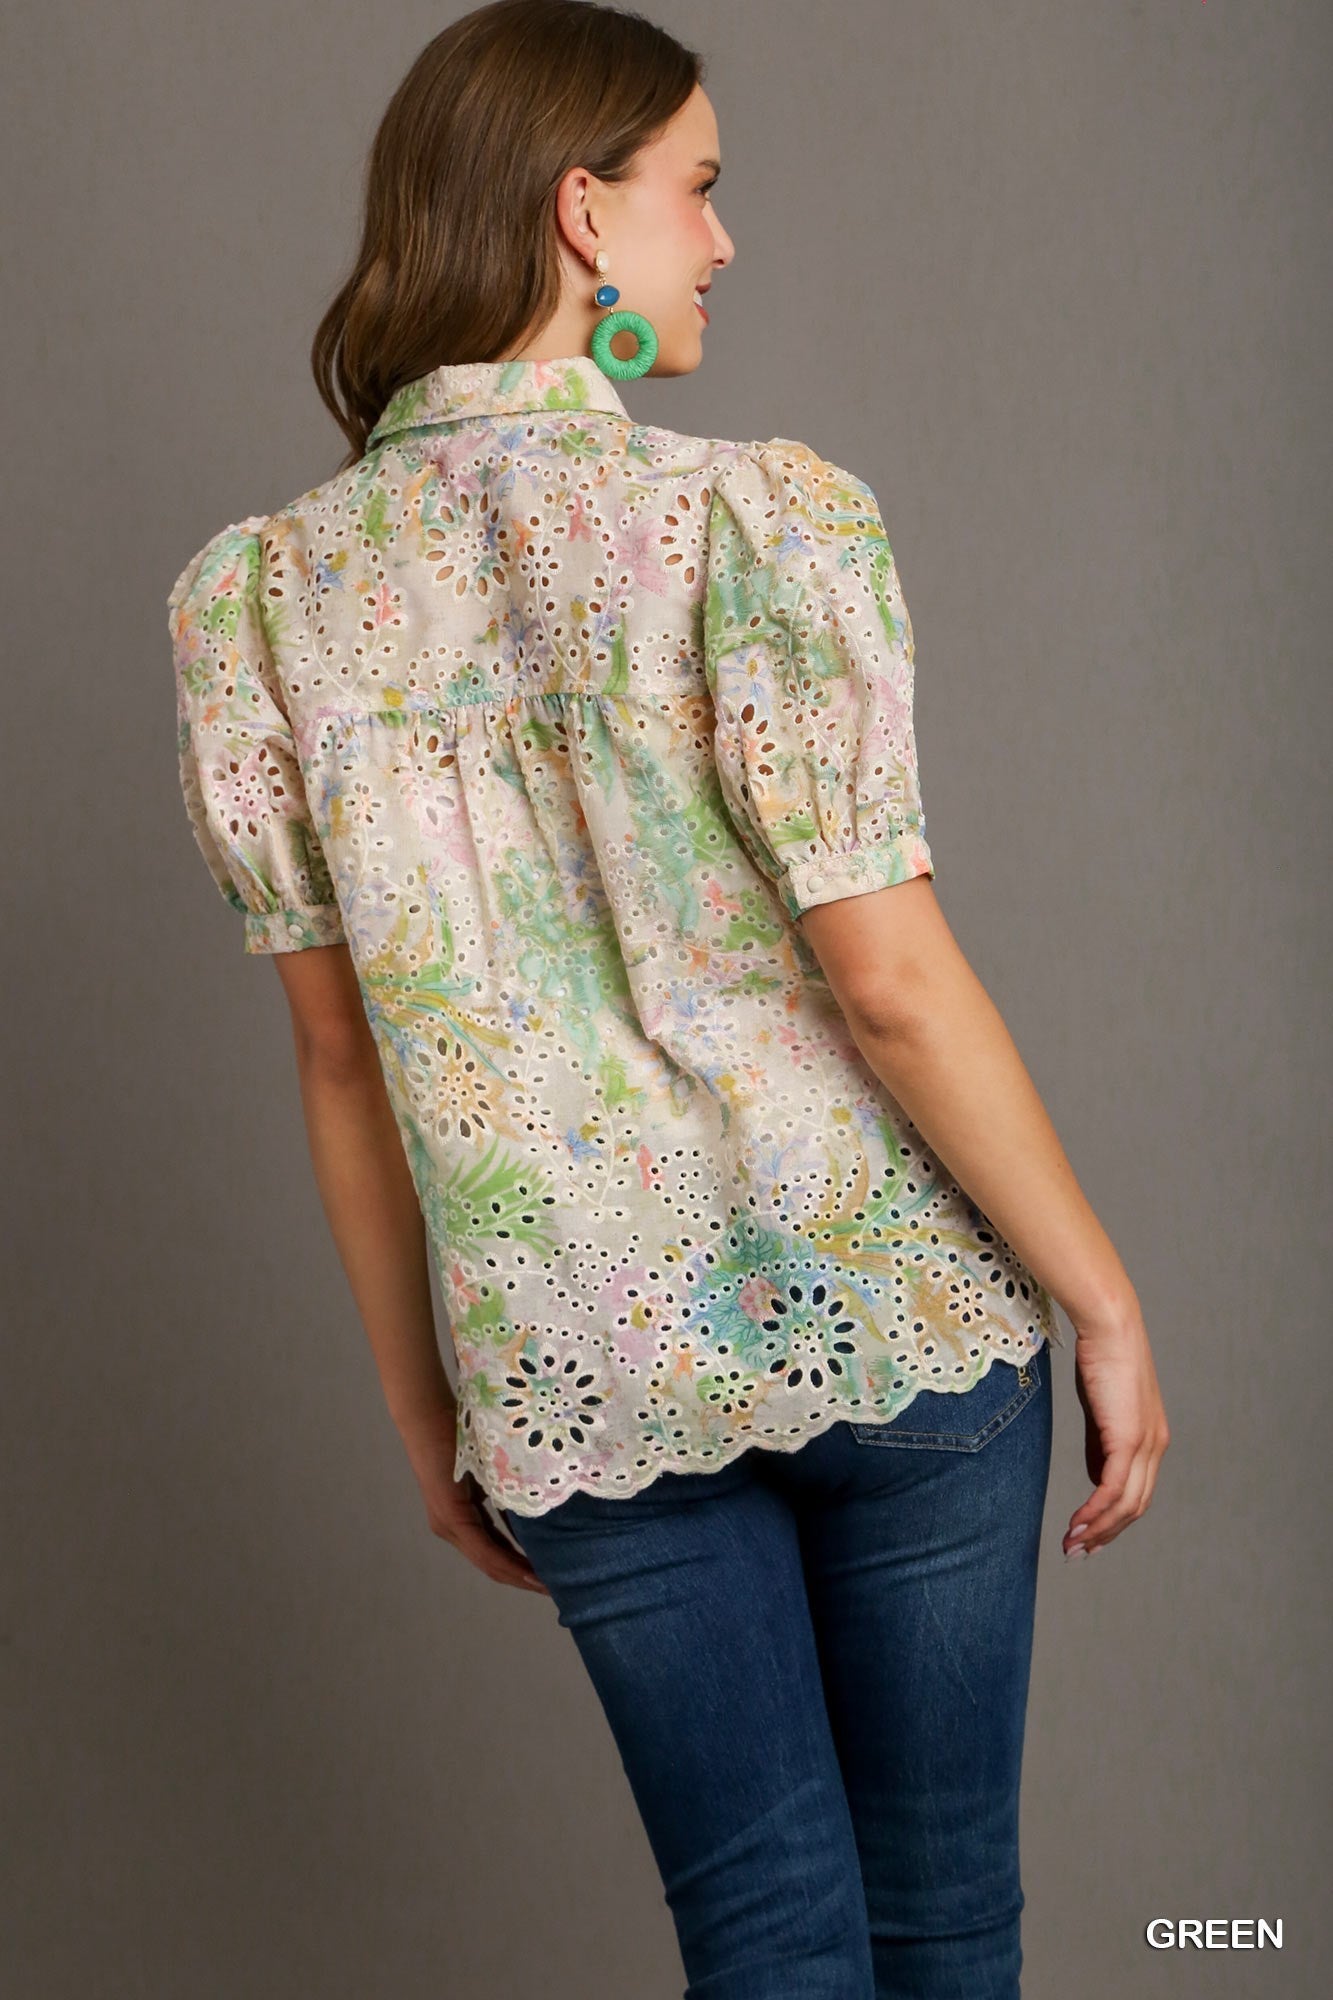 Scalloped Edge Watercolor Floral Top